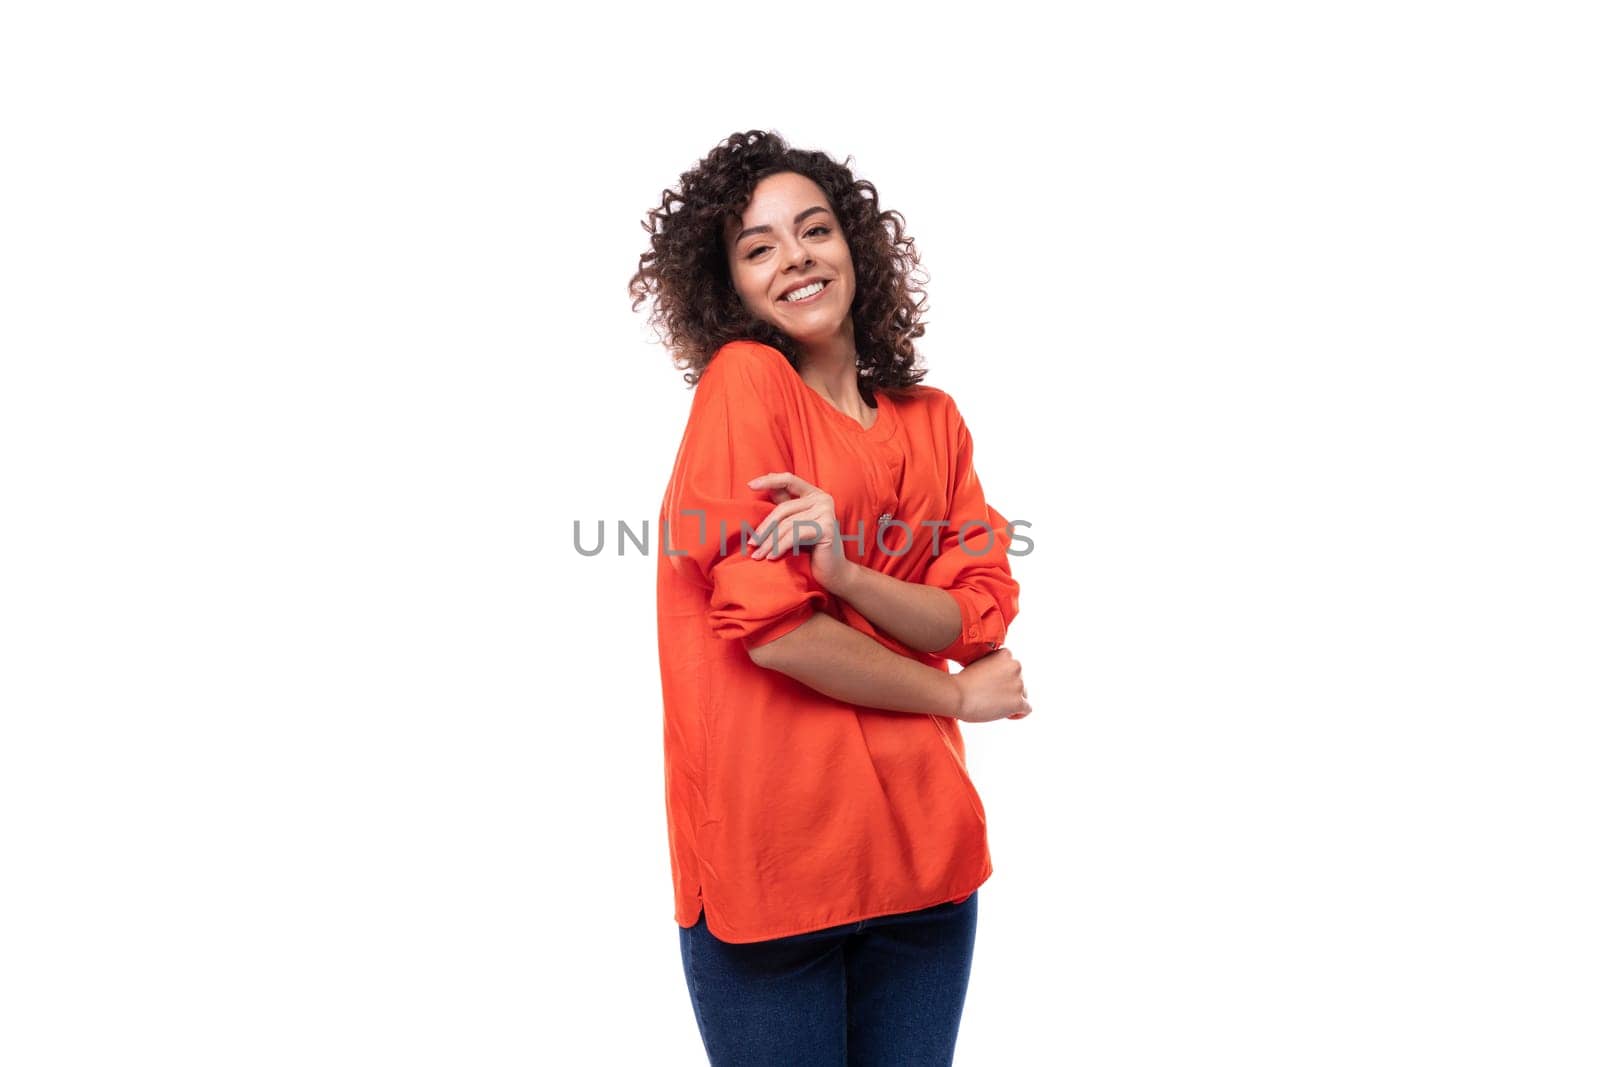 young cheerful caucasian lady with curly hair style dressed in orange shirt.